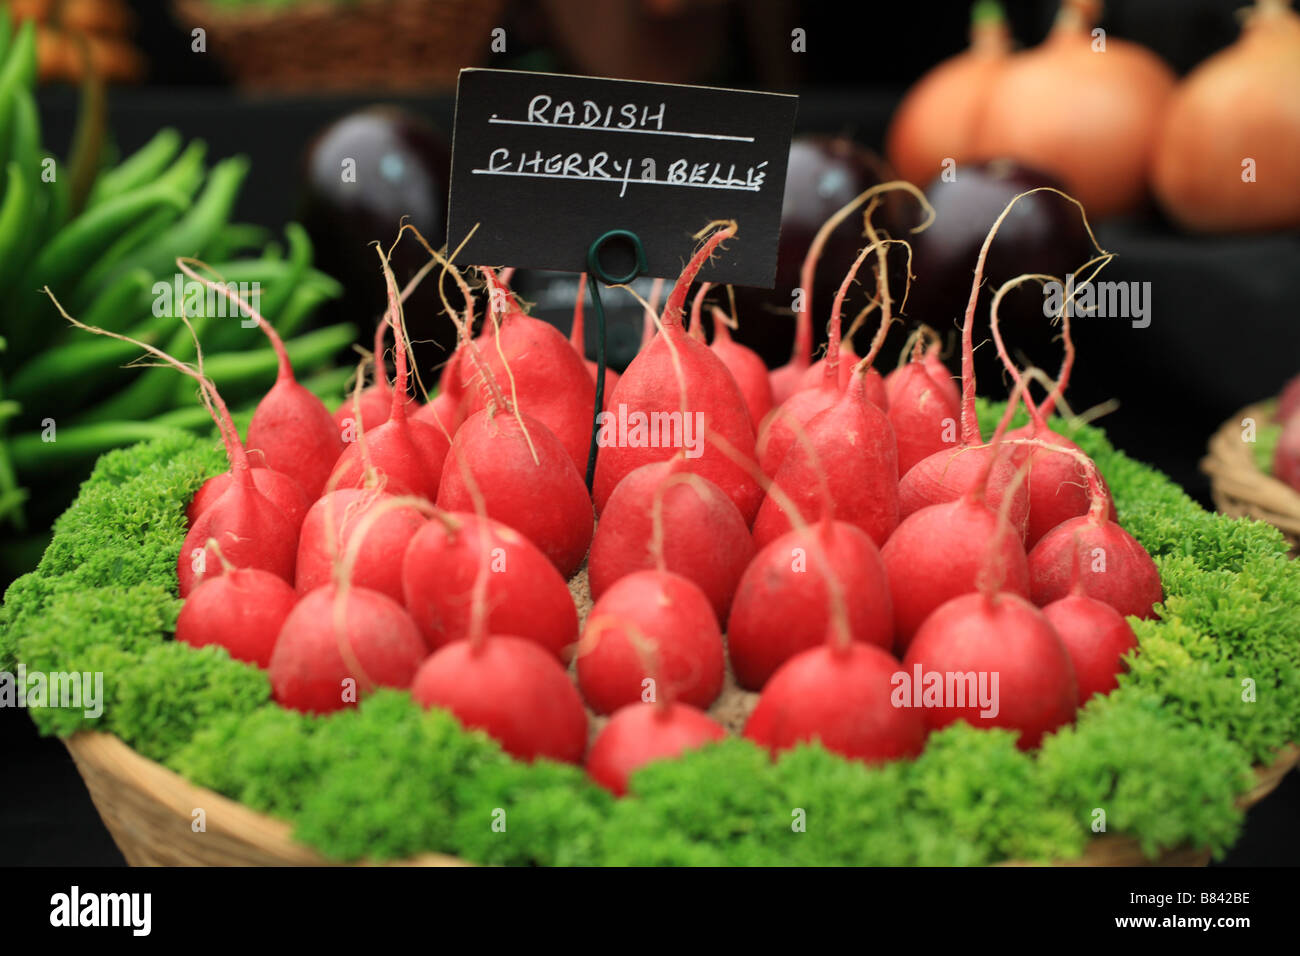 Vegetable display, 'Radishes' red veg at an RHS flower show. Radishes in a pot surrounded by parsley. Stock Photo